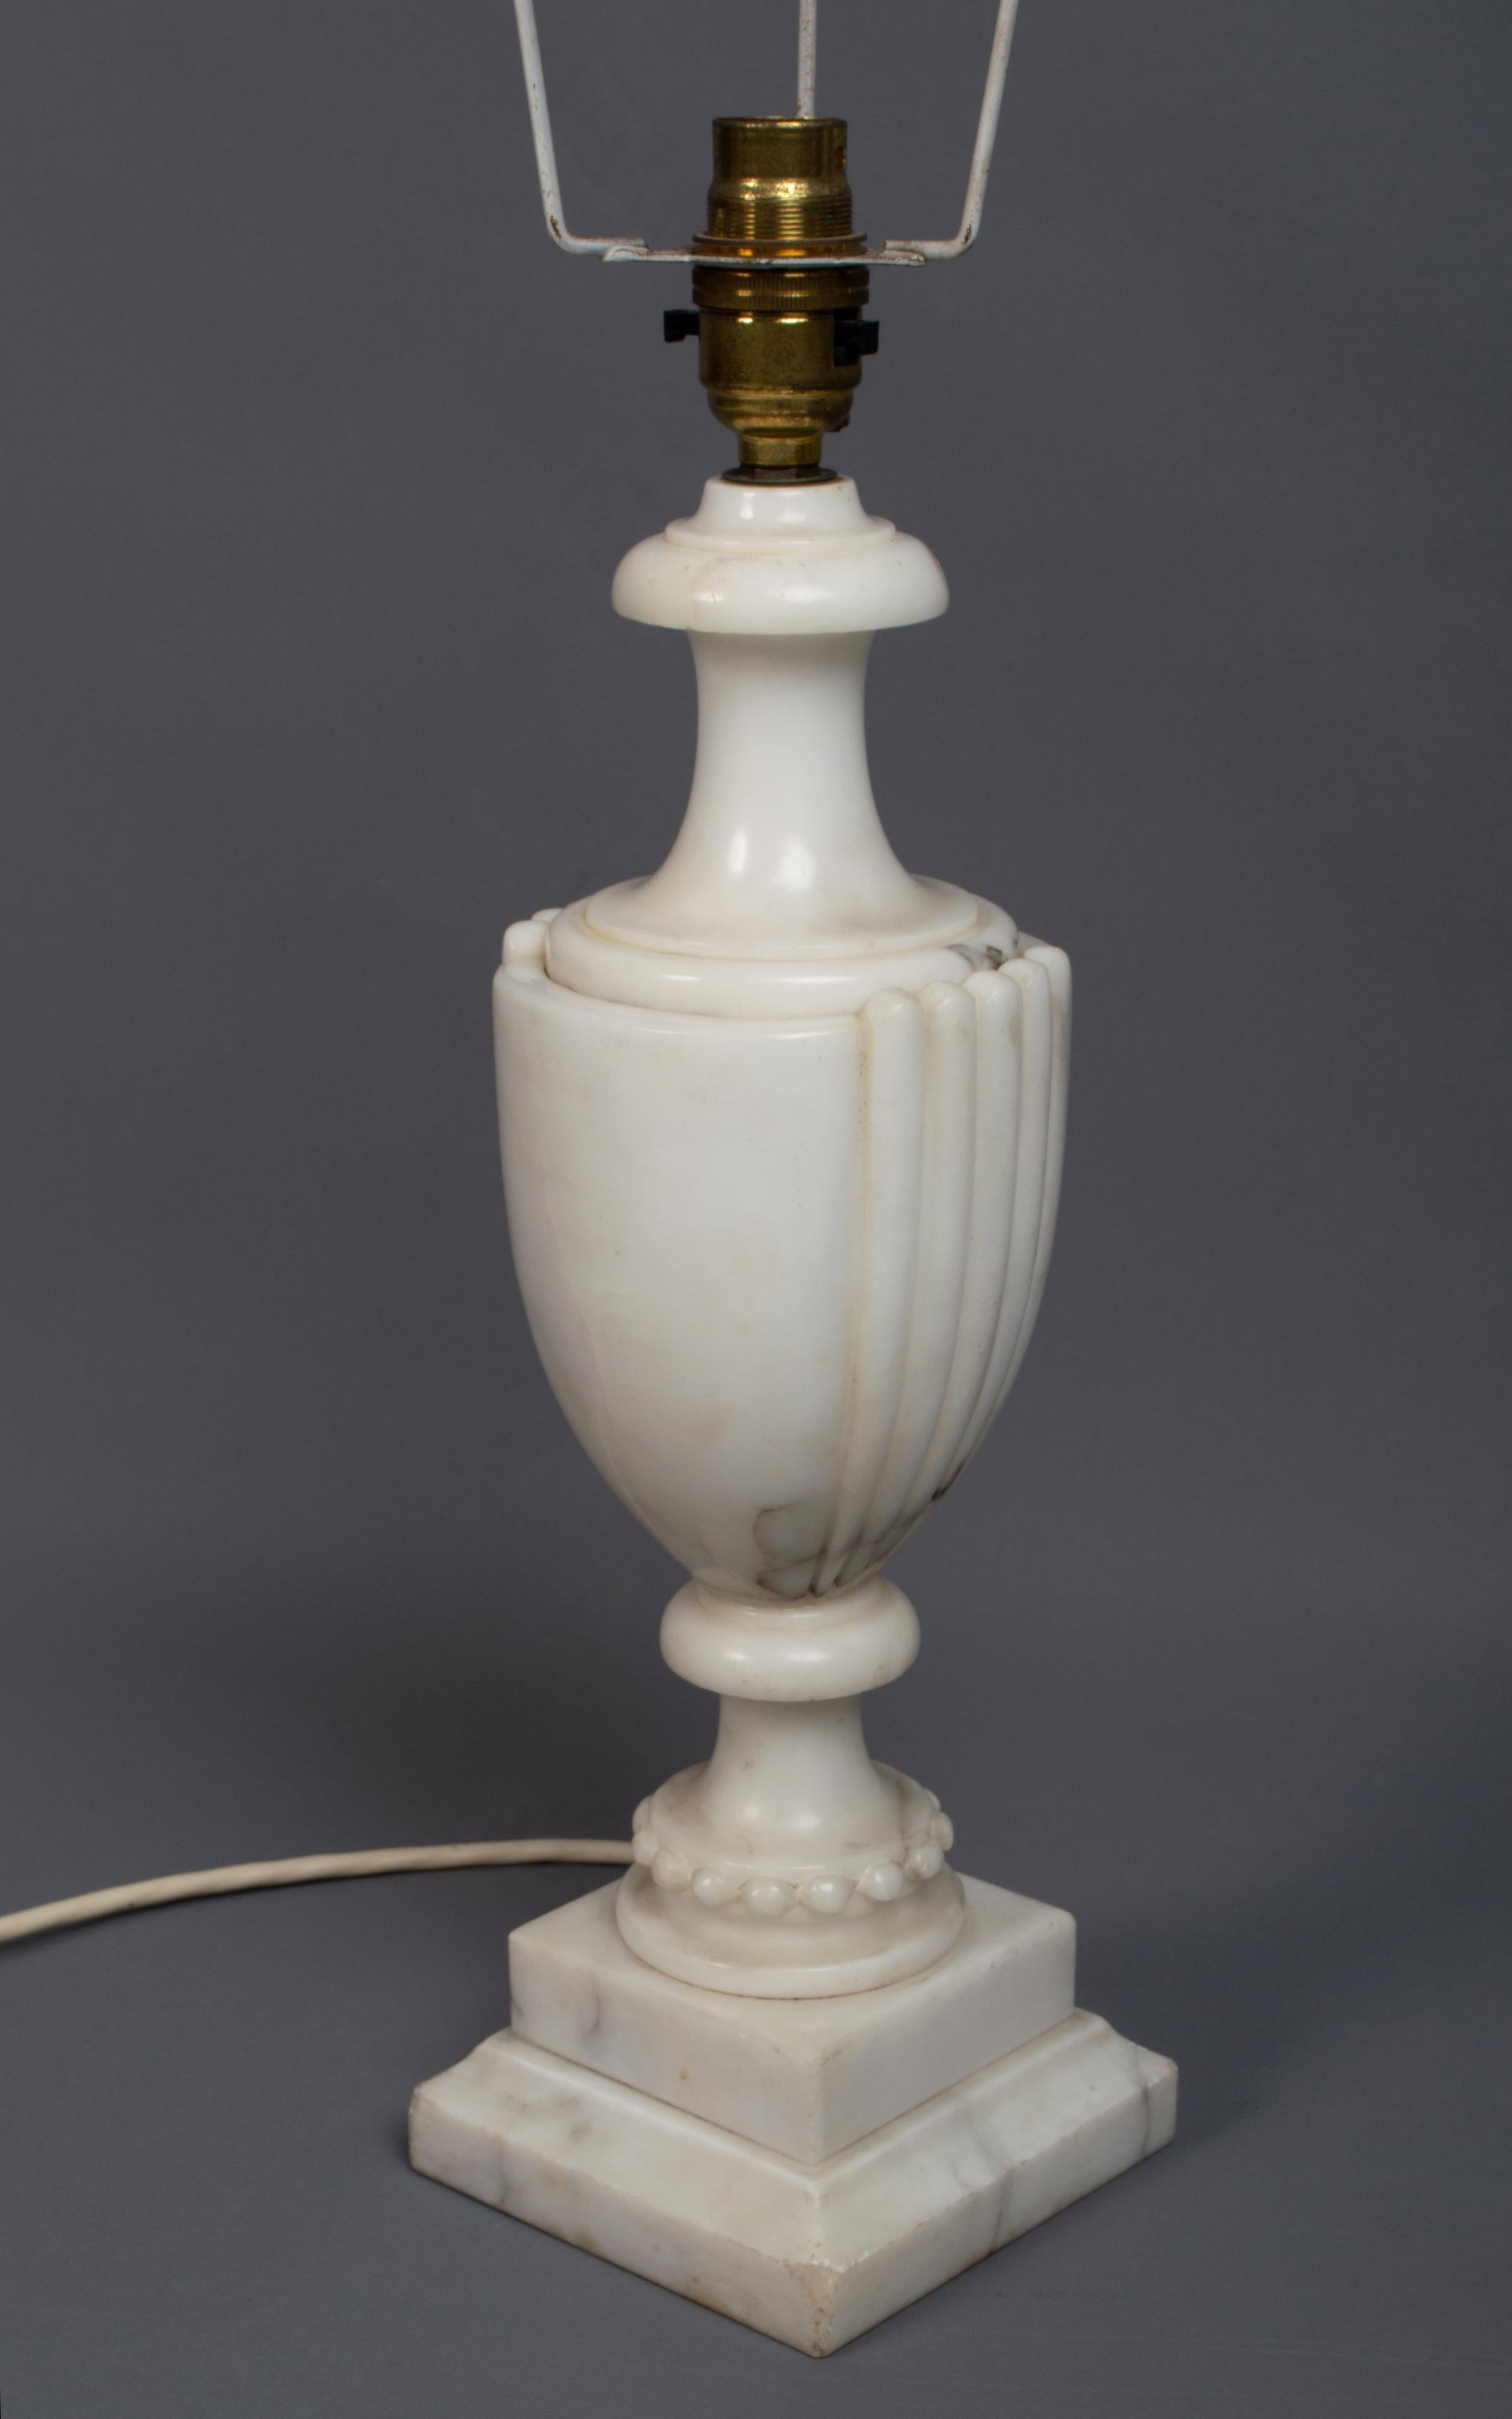 Neoclassical urn shaped marble table lamp Italy, C.1950

Neoclassical urn form table lamp. Veined marble example on a stepped square base.

In very good condition commensurate with age, minor signs of wear to corners of base.

Lamp shade not